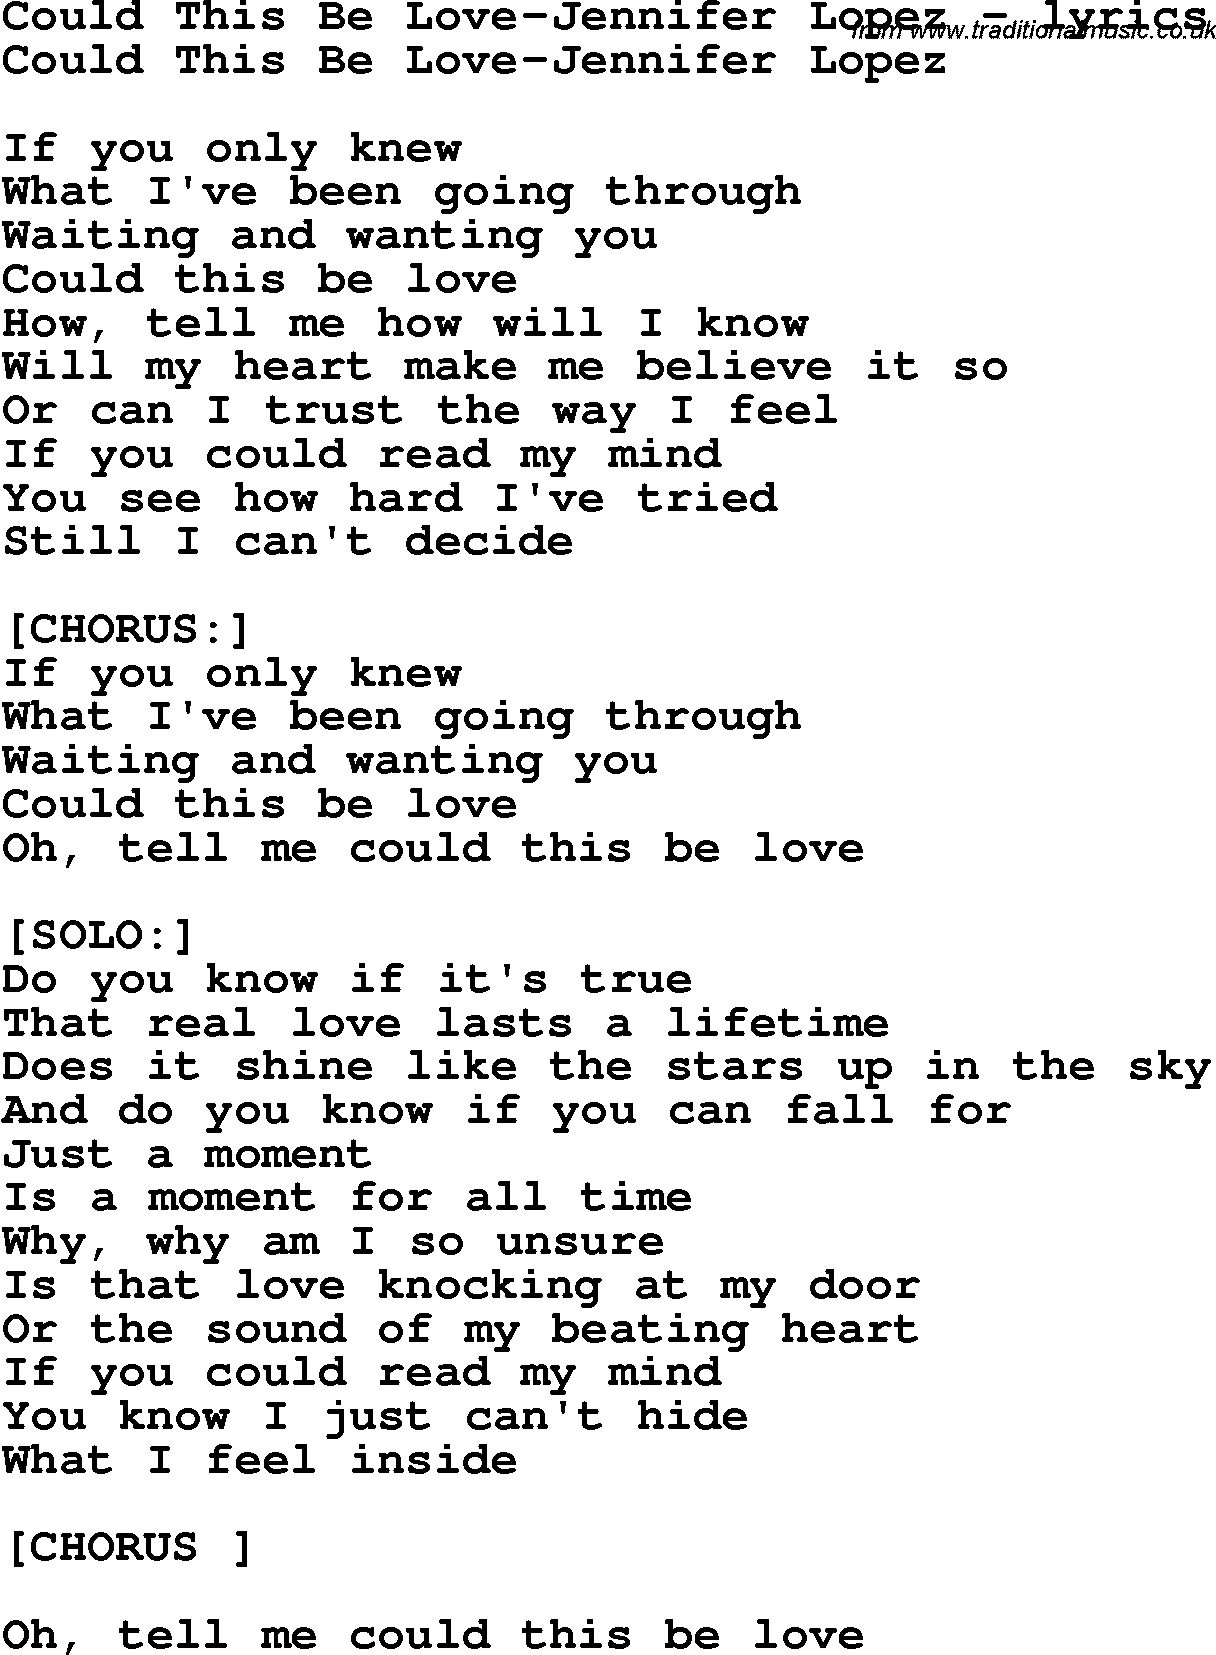 Love Song Lyrics for: Could This Be Love-Jennifer Lopez